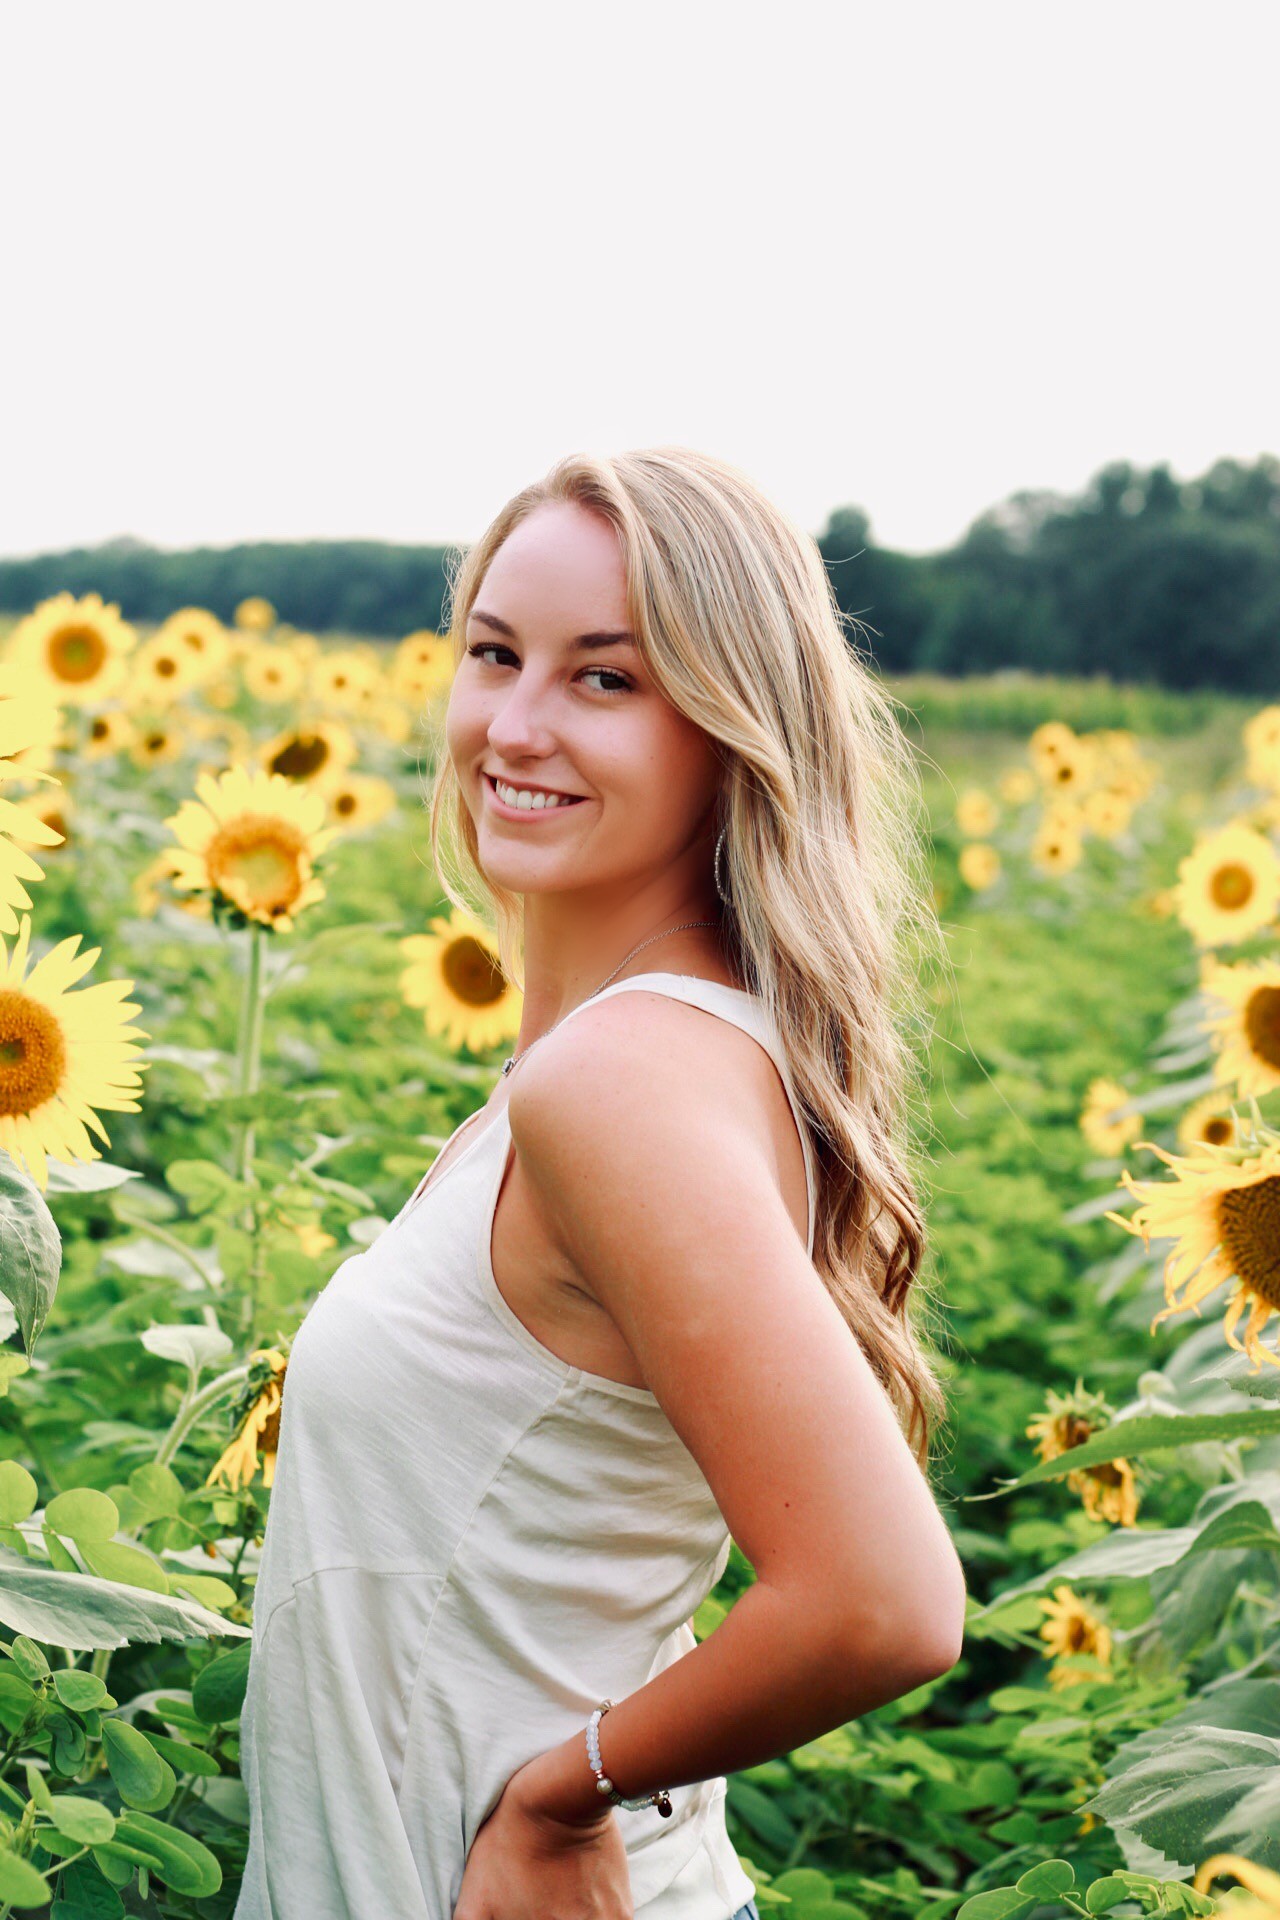 Ashlyn Huey poses for a photo in front of sunflowers.